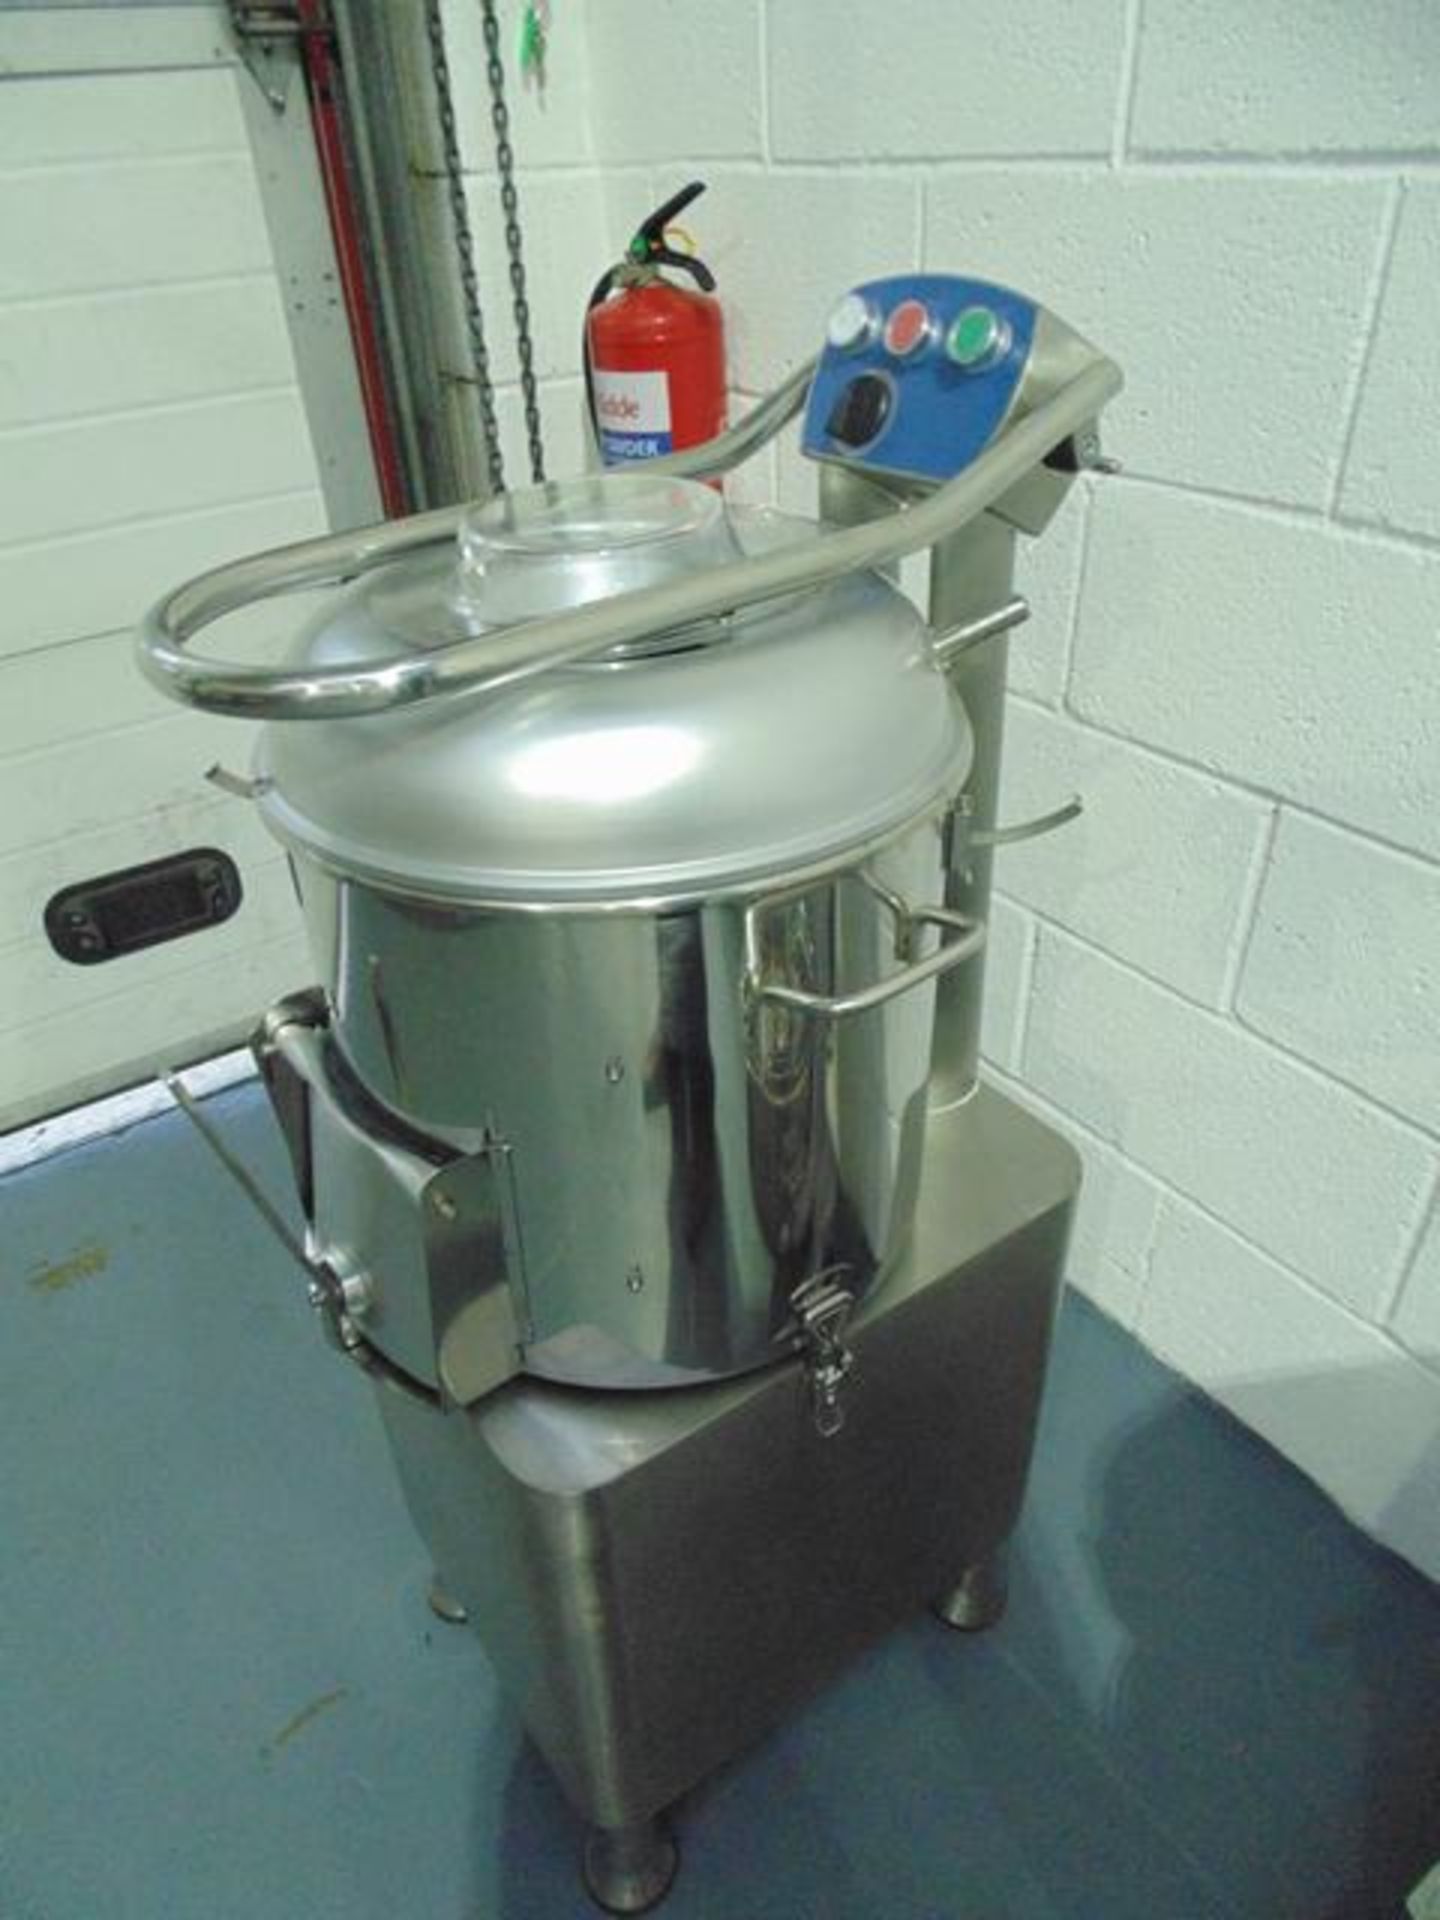 Commercial potato peeler floor standing capacity 400kgs per hour (880LB) the abrasive is highly